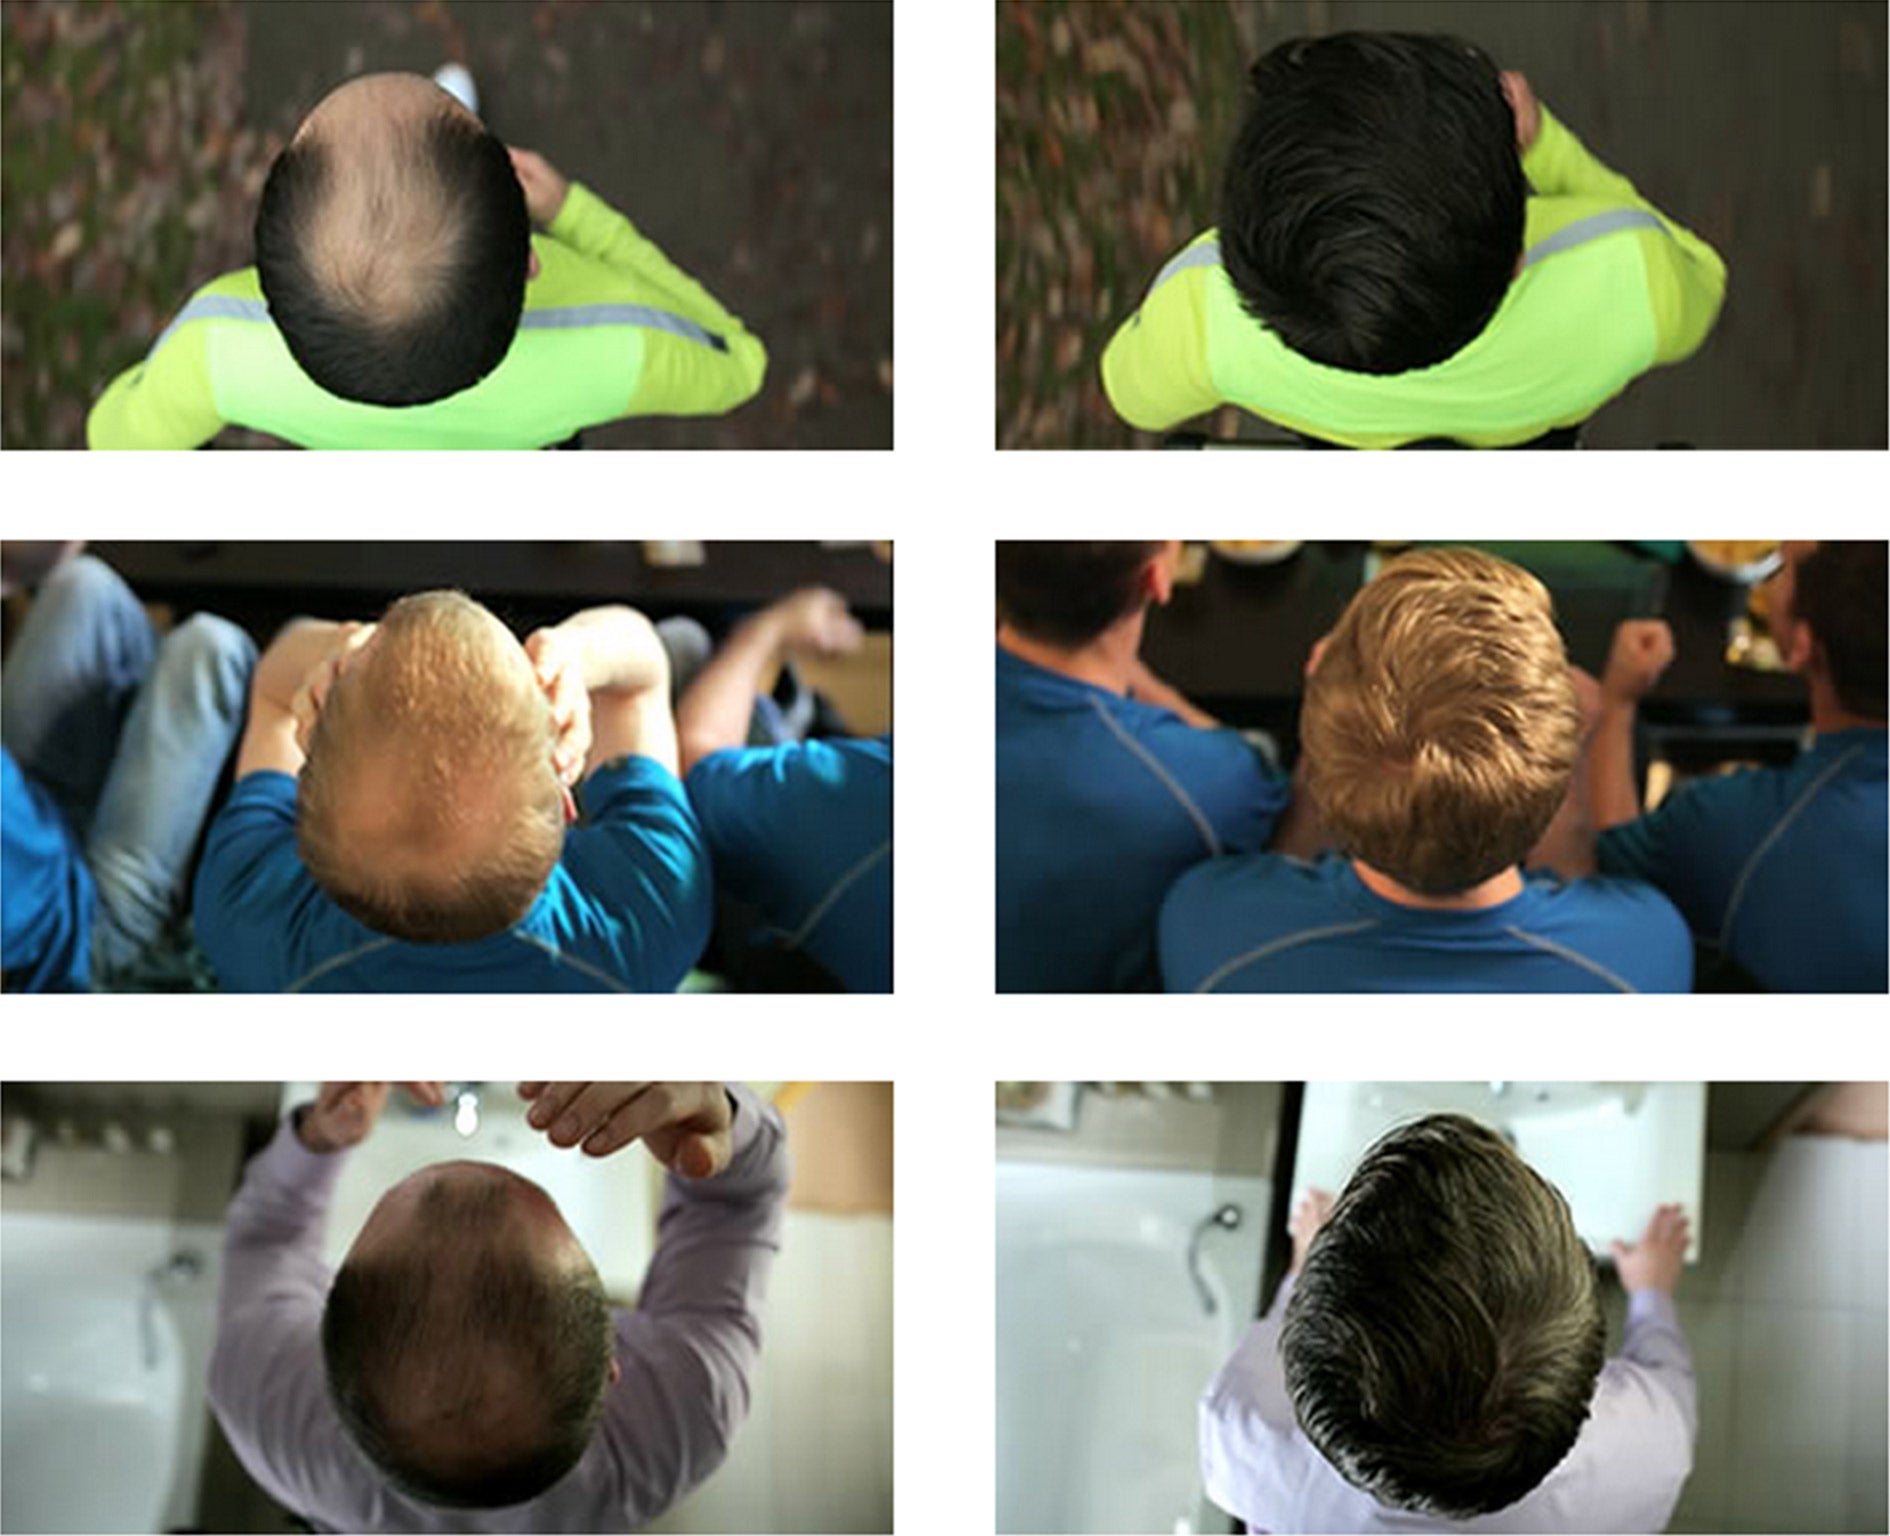 The Ziering advert; the ASA pointed out those on the right have thicker hair all over their heads